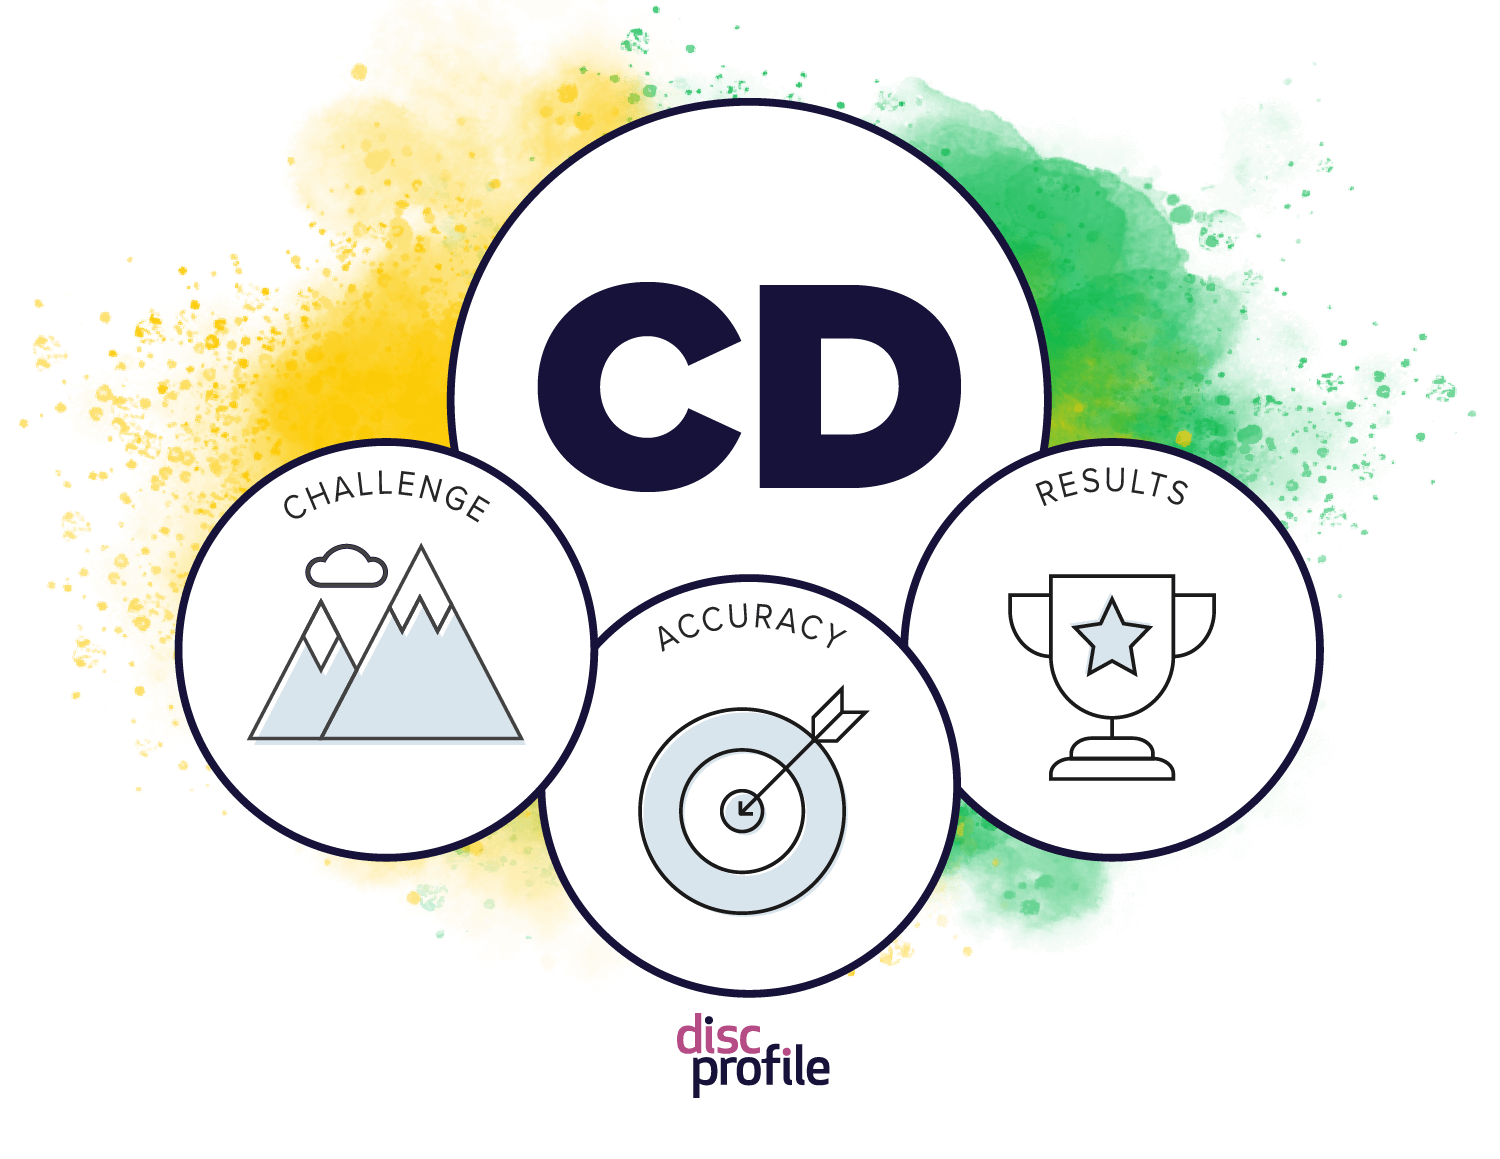 CD style graphic showing the priorities of challenge, accuracy, and results